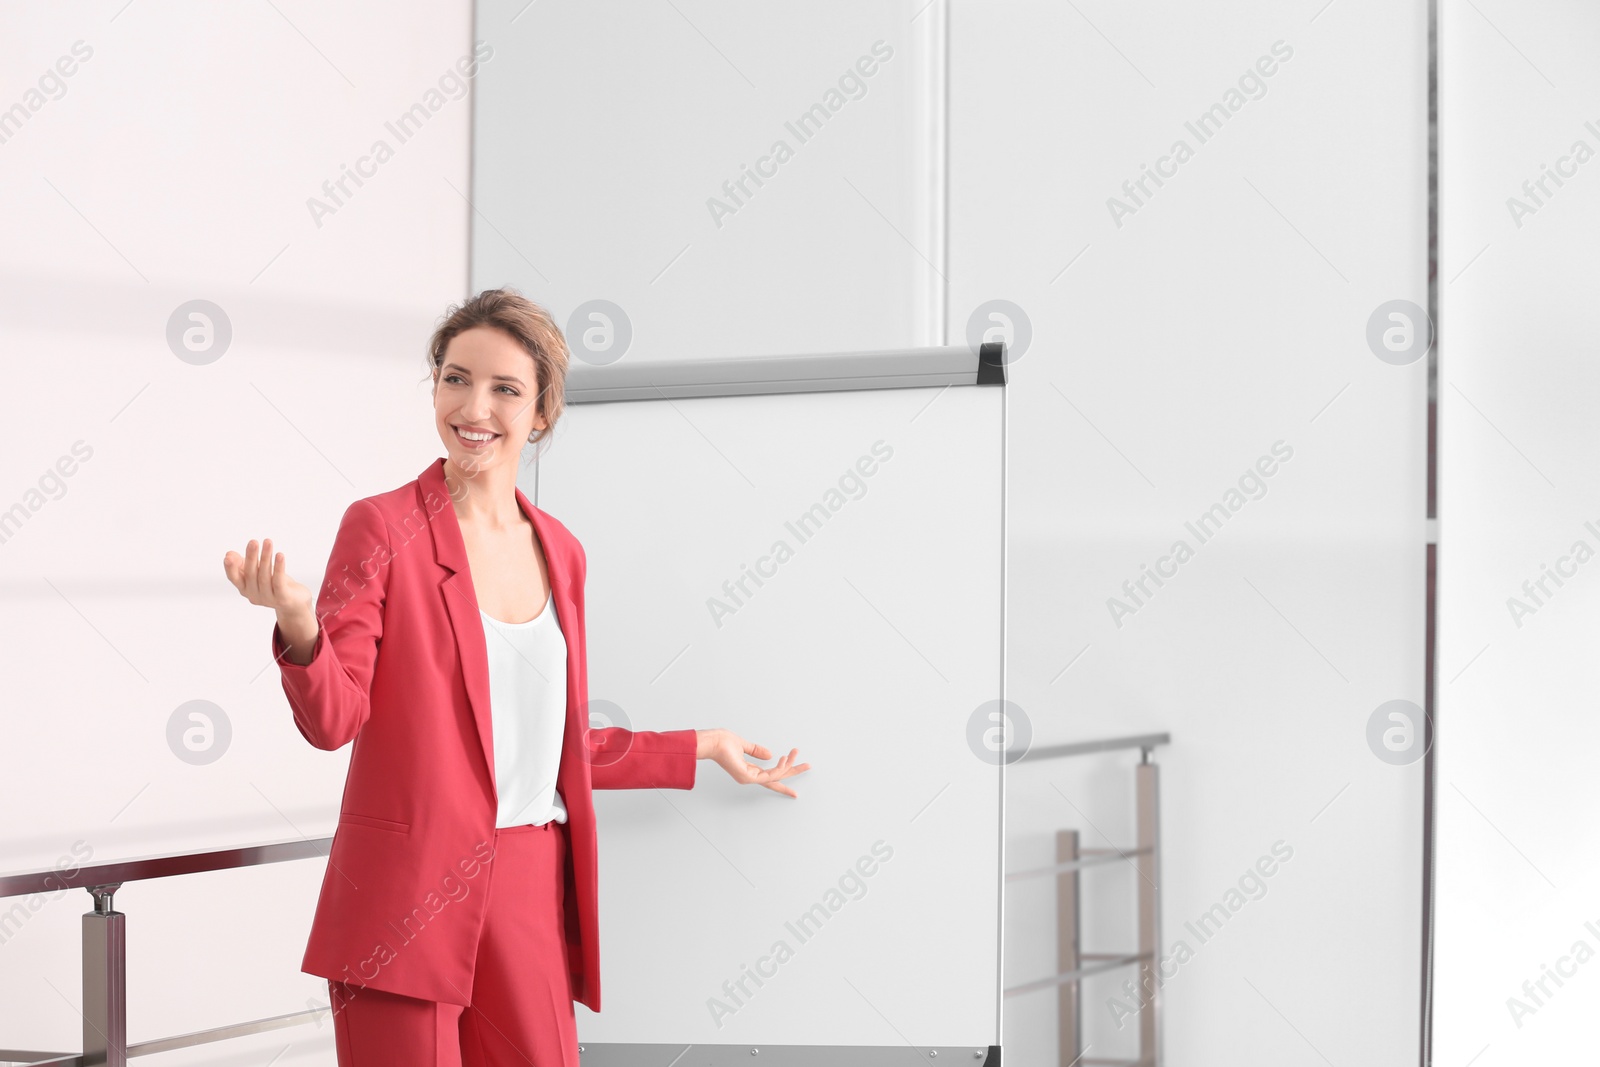 Photo of Female business trainer giving presentation on whiteboard indoors